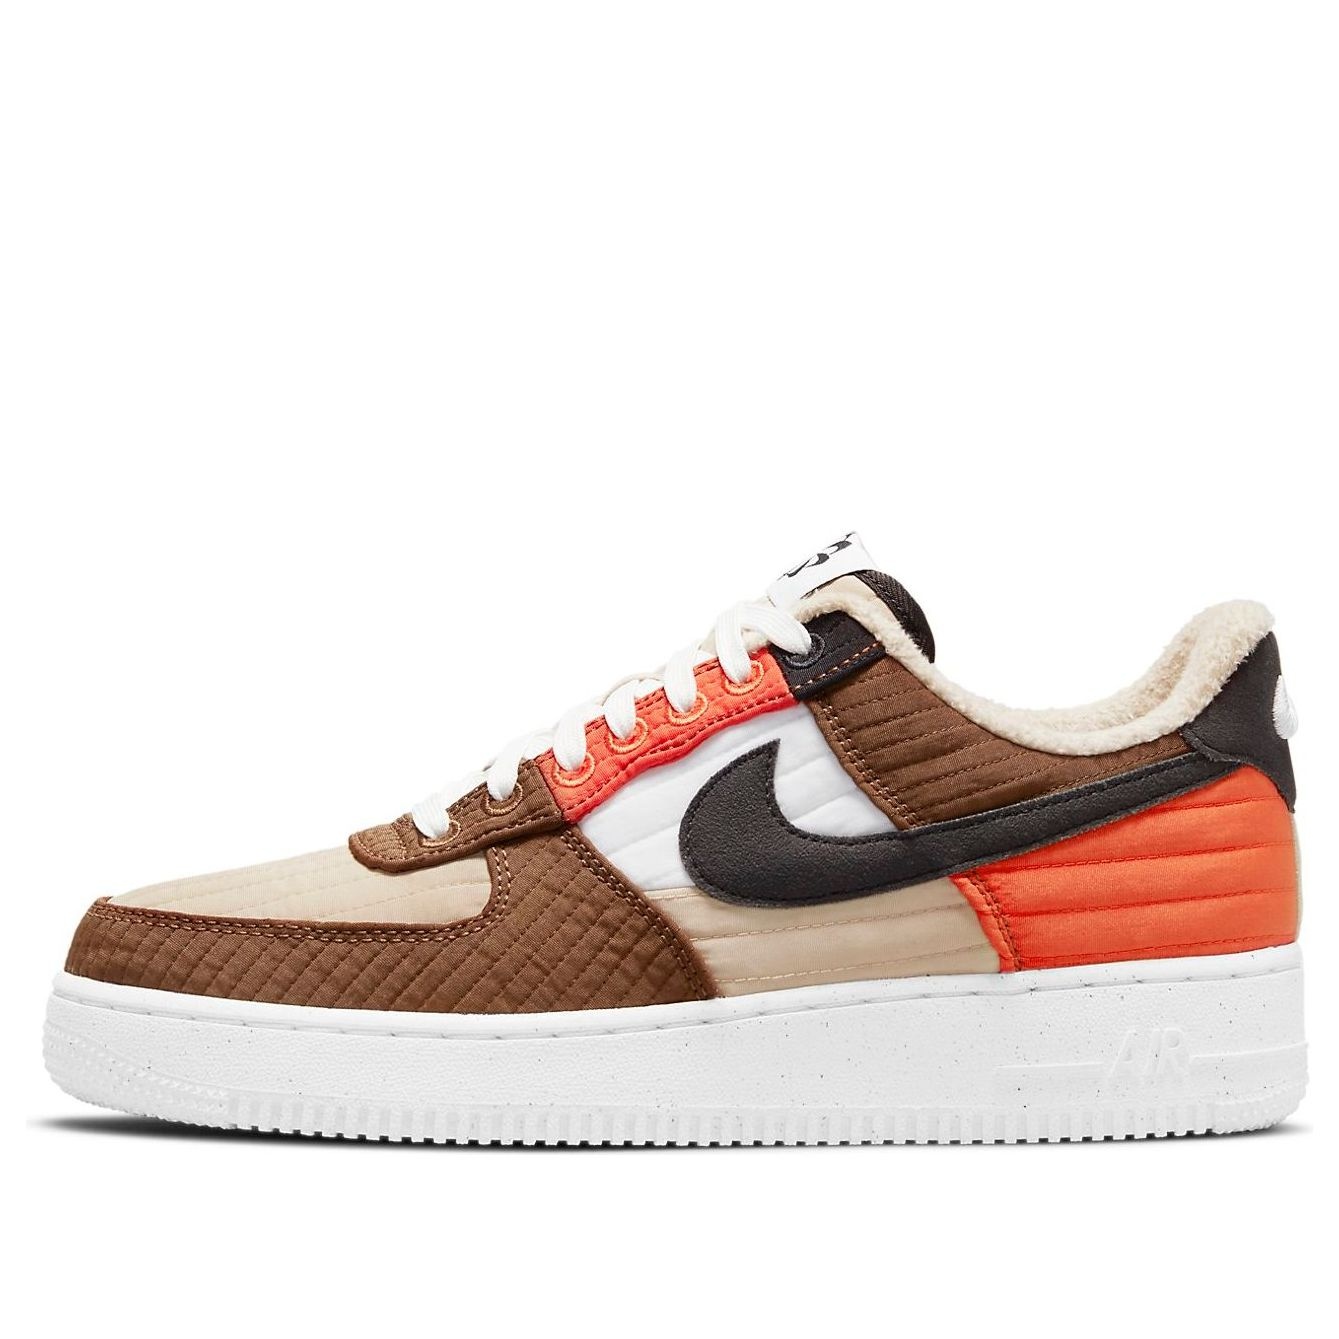 (WMNS) Nike Air Force 1 '07 Low LXX 'Toasty' DH0775-200 - 1